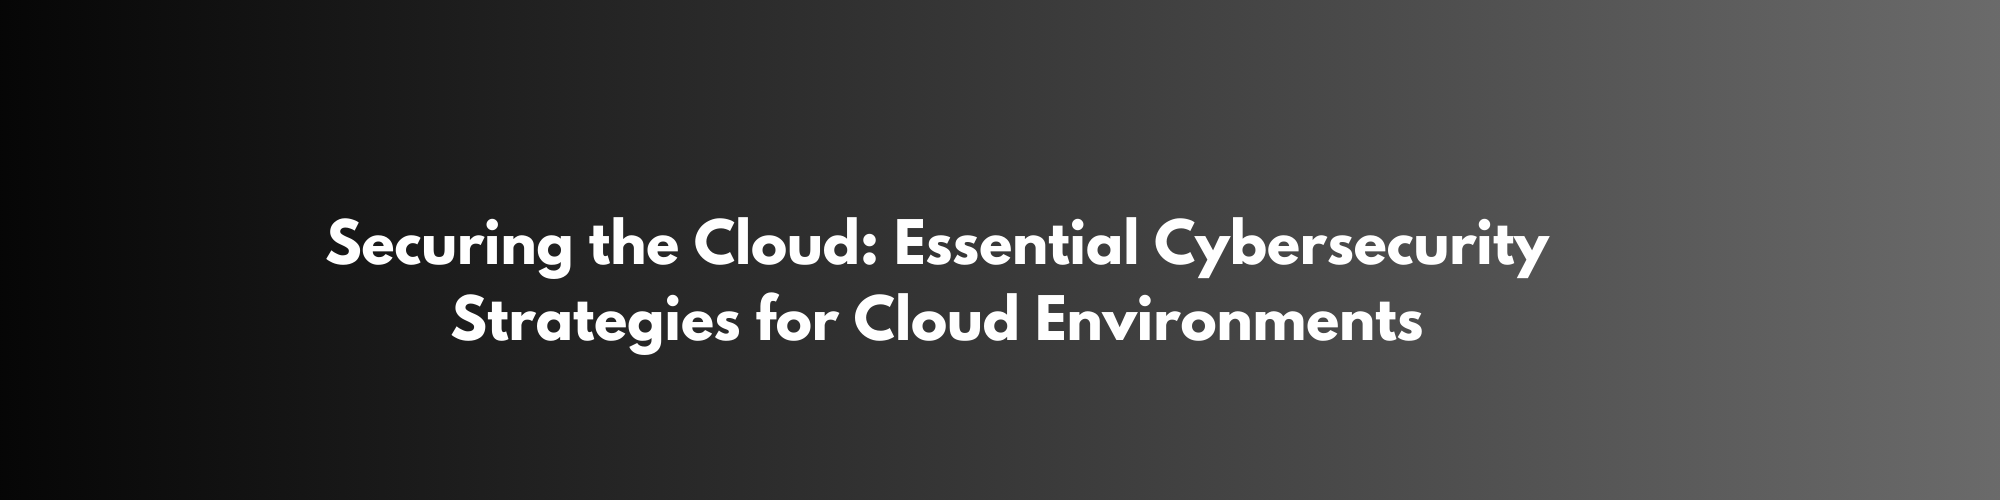 Securing the Cloud: Essential Cybersecurity Strategies for Cloud Environments